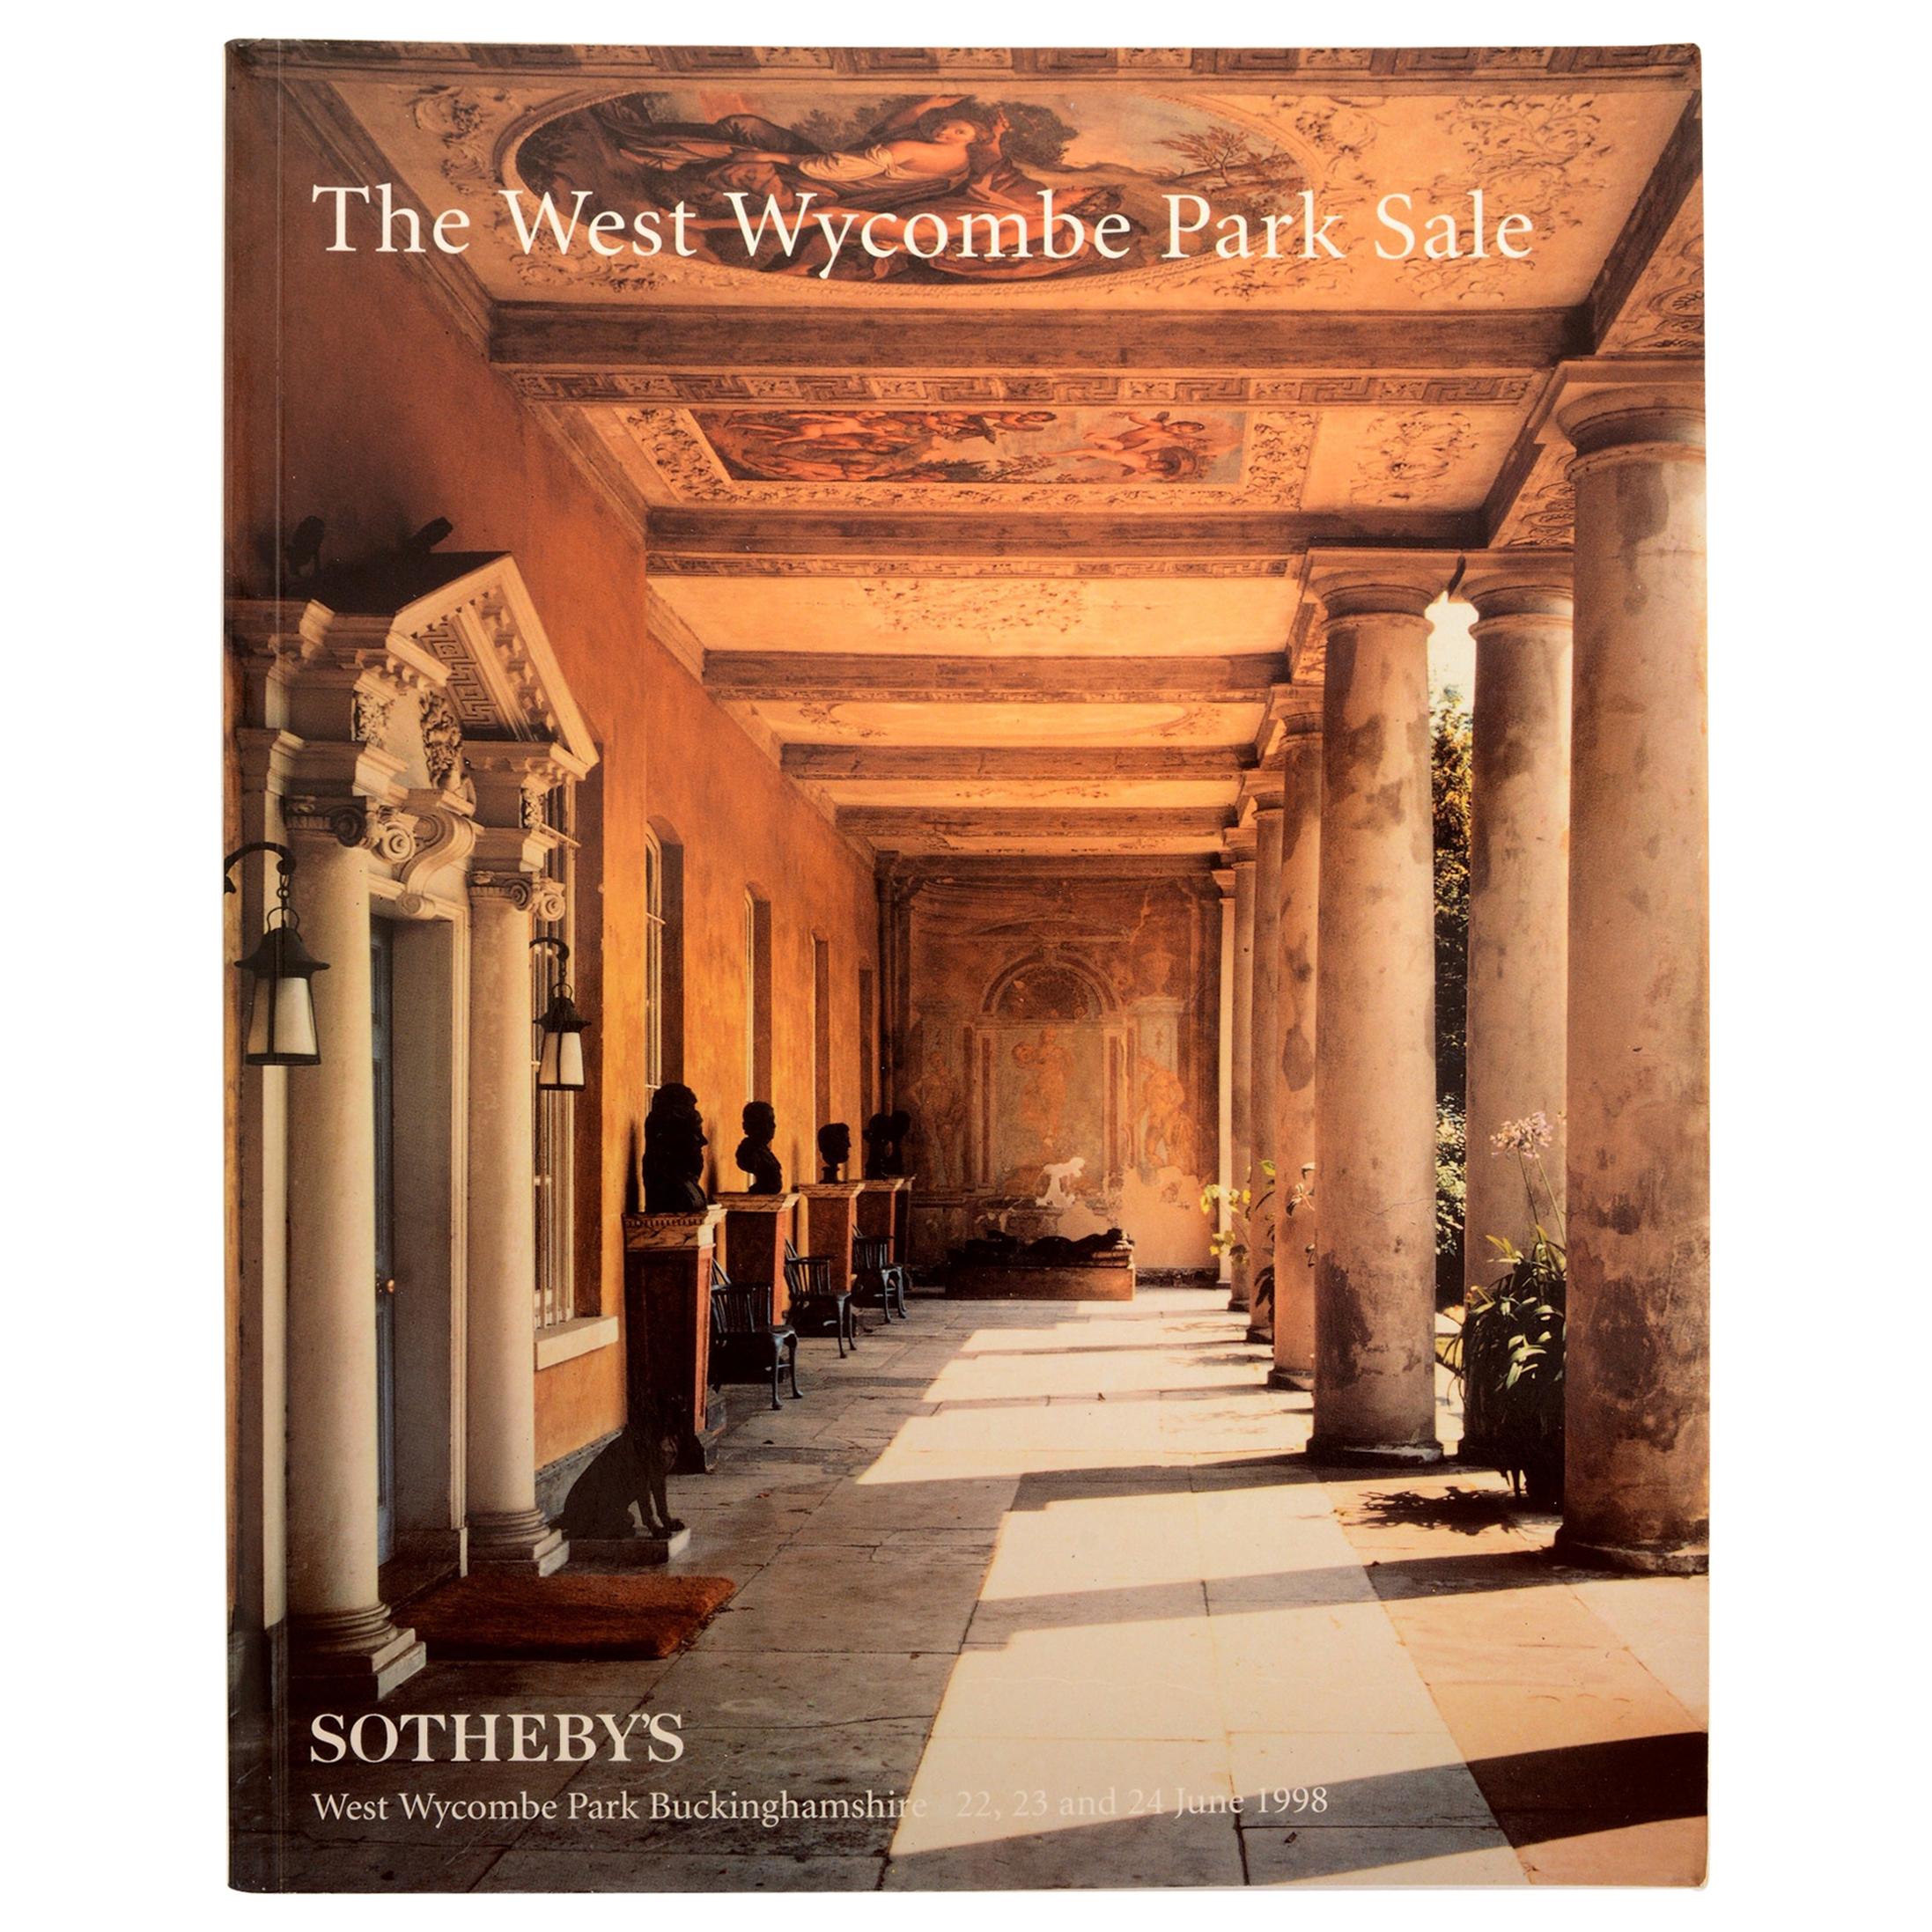 Sotheby's The West Wycombe Park Sale, June 1998, First Edition For Sale